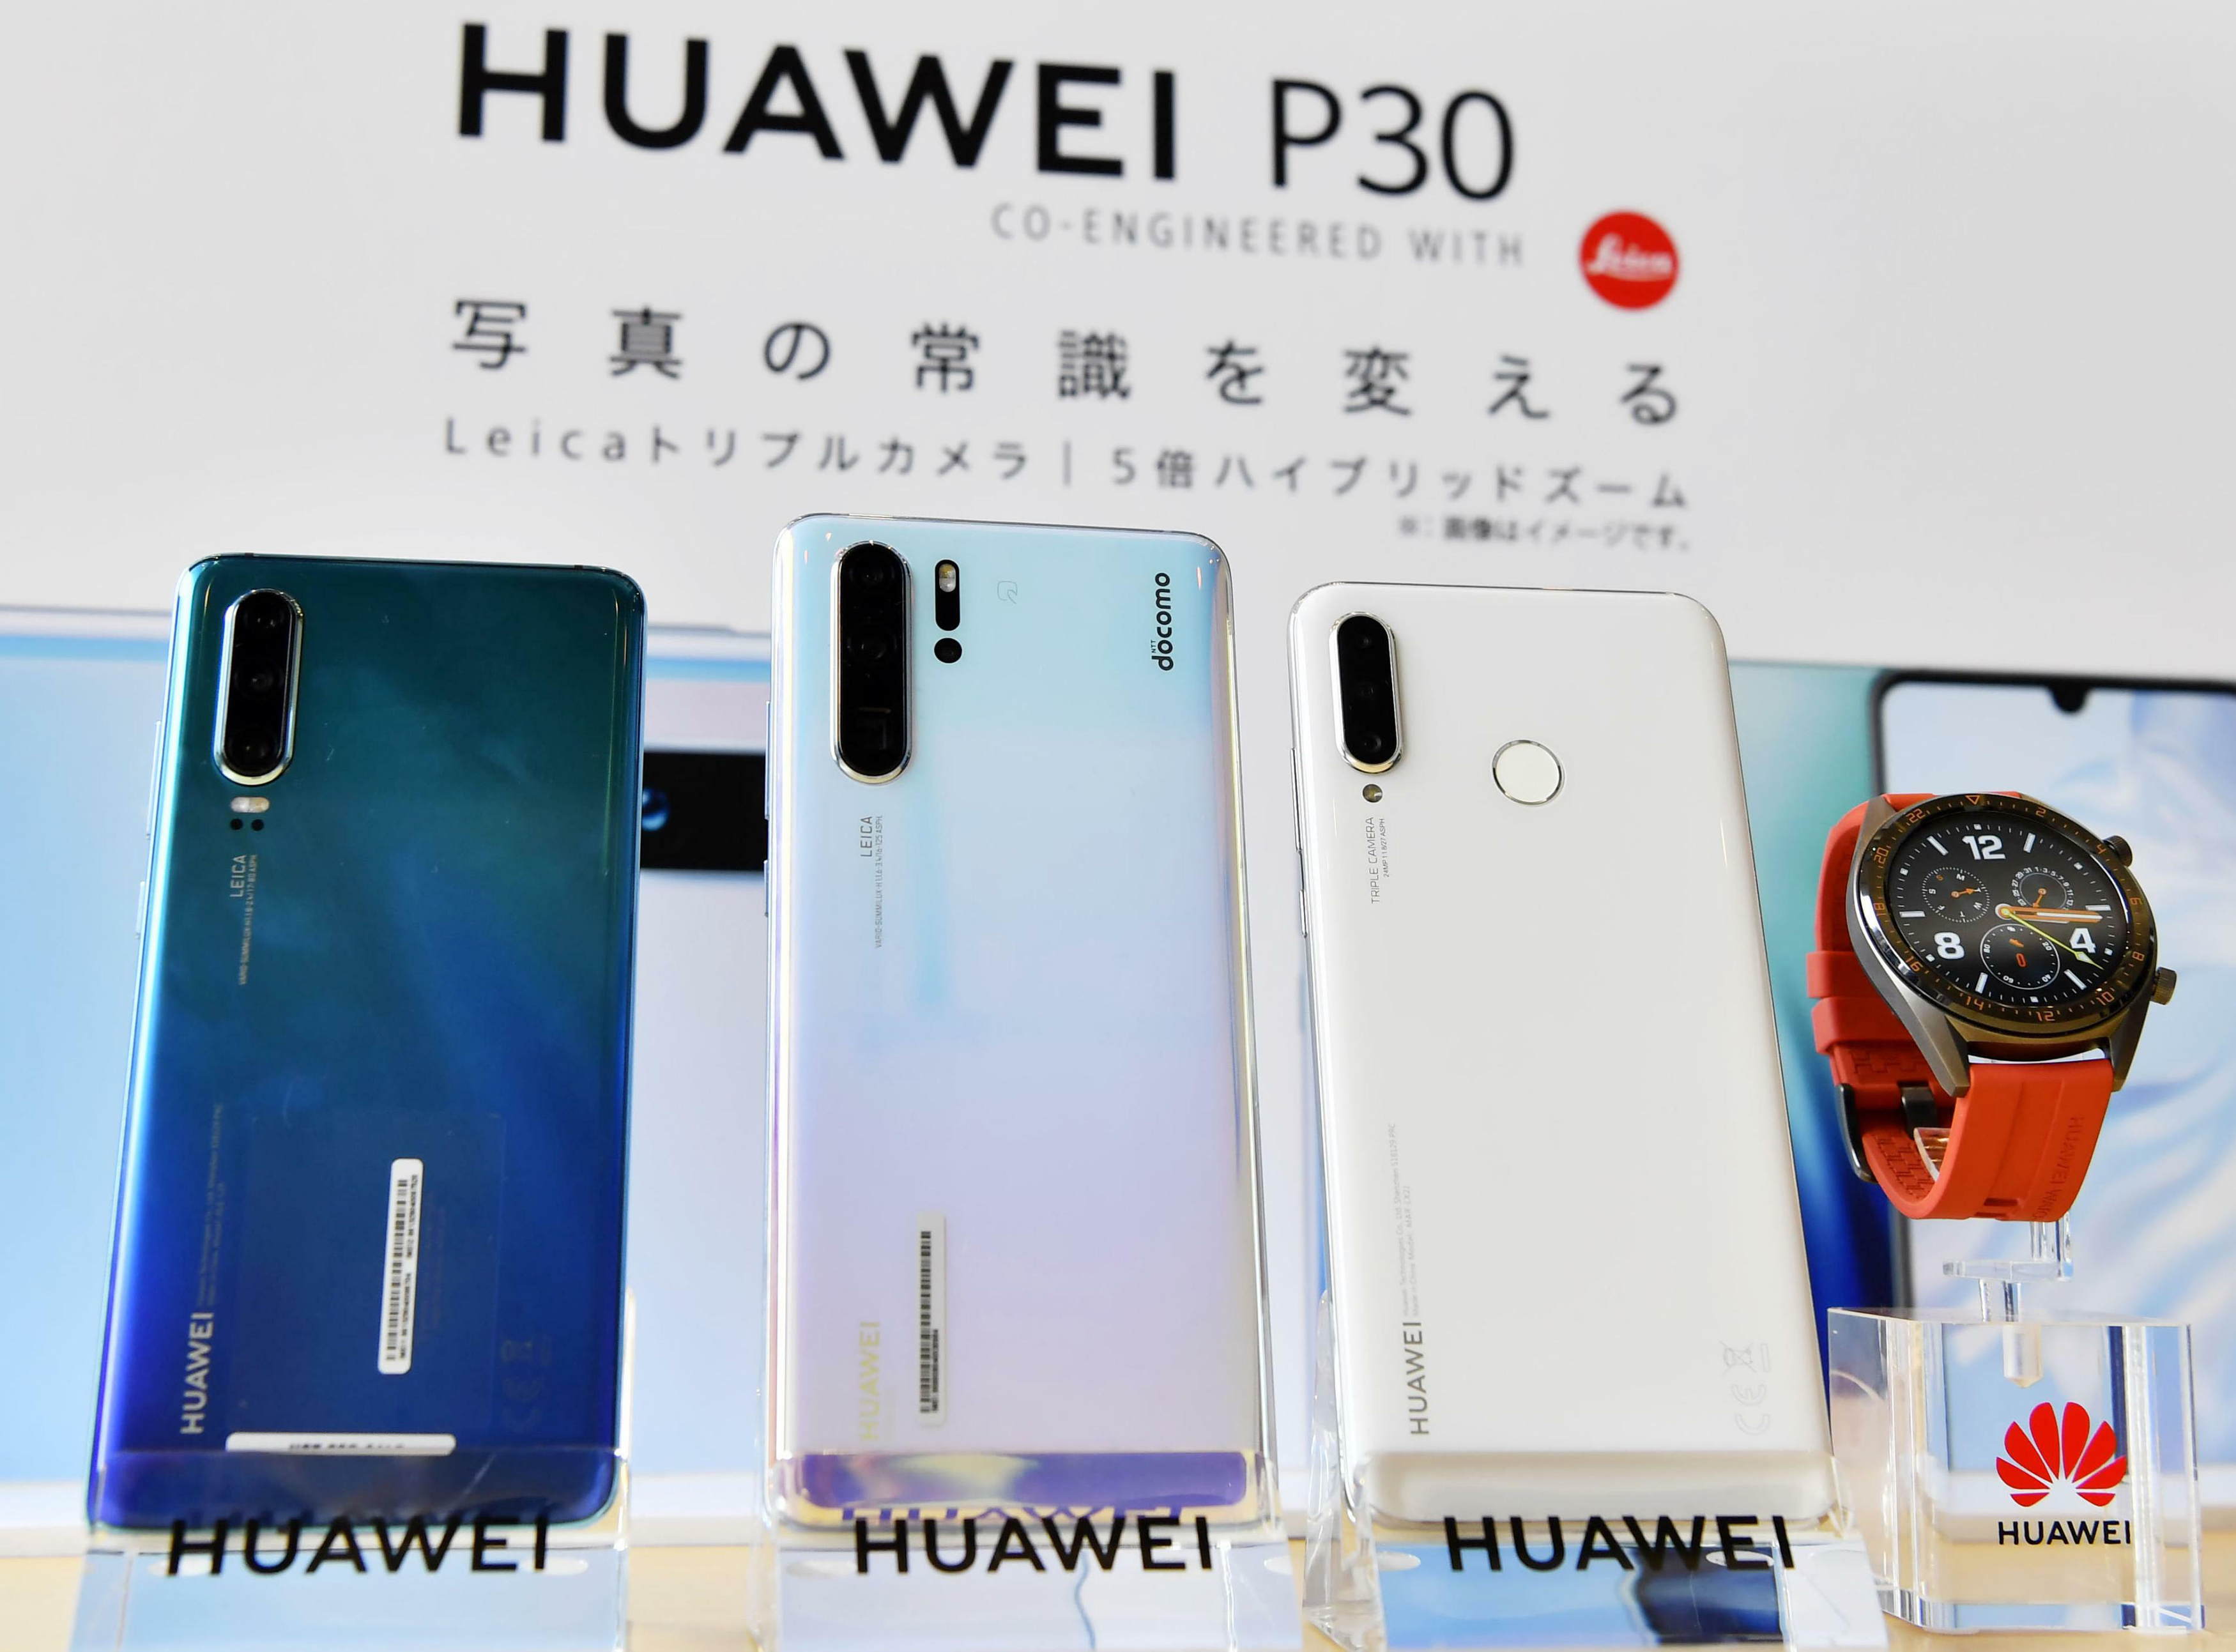 jammer network connections bellevue - UK, Japan Mobile Operators Suspend Huawei 5G Phone Launches